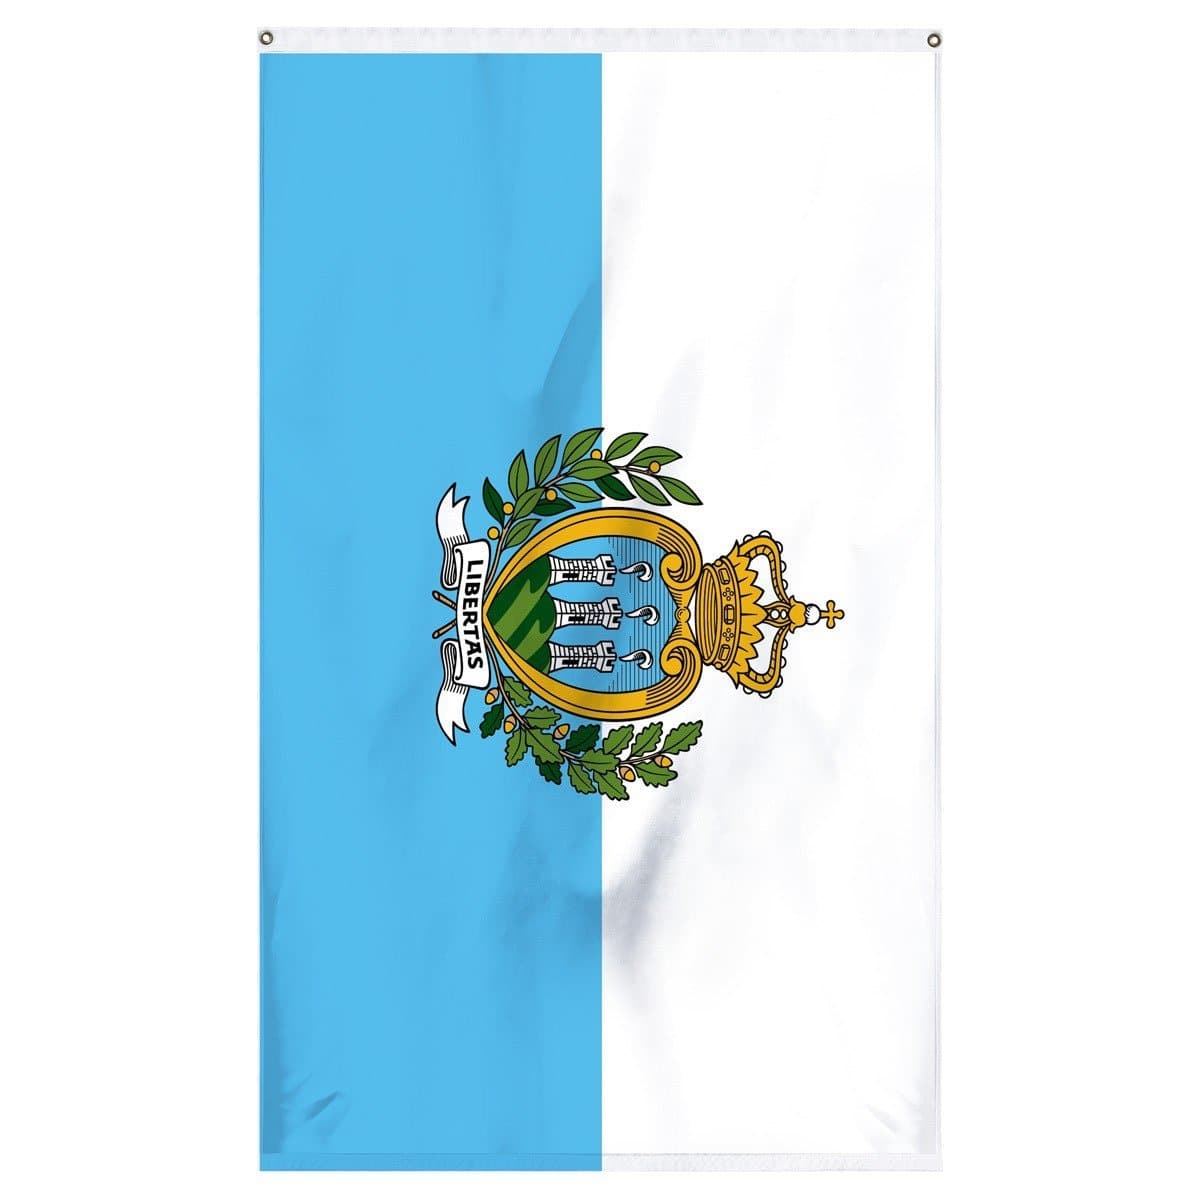 San Marino national flag for sale to buy online now from an American company